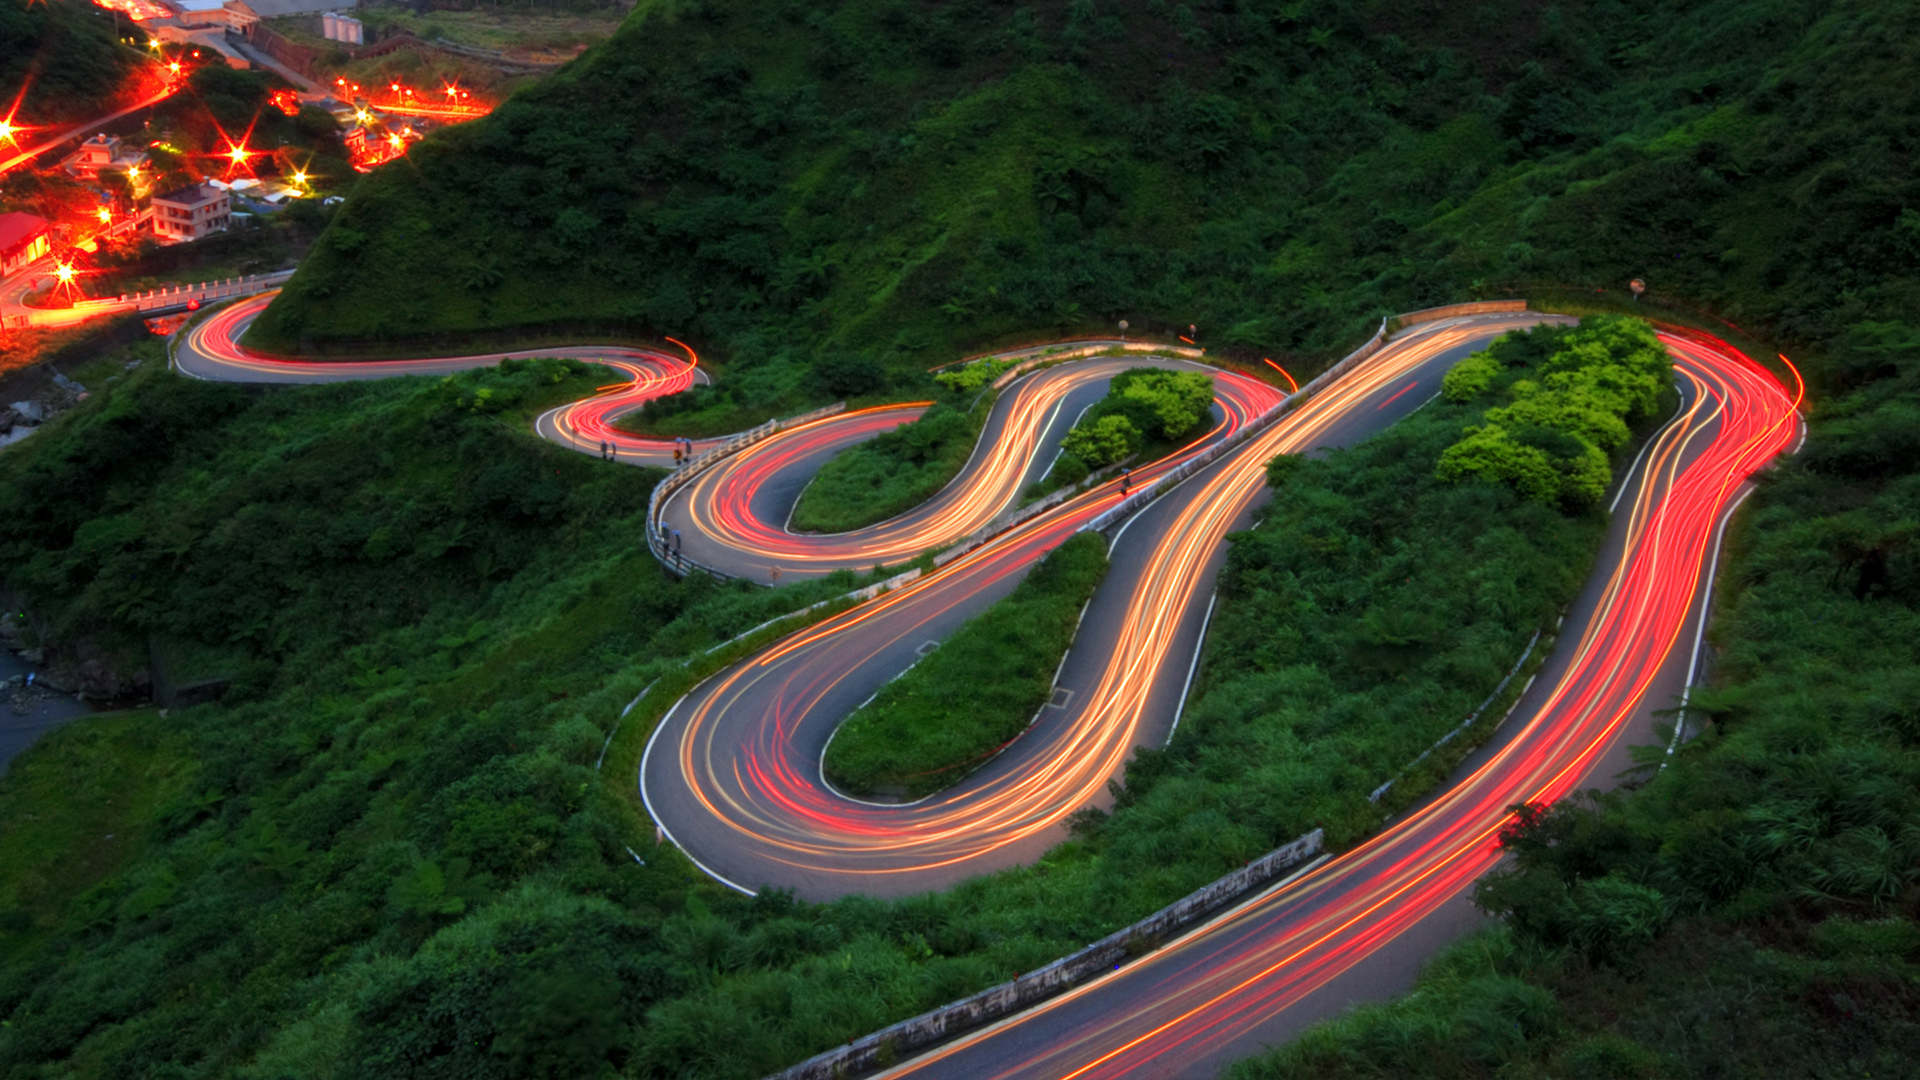 General 1920x1080 nature landscape road house lights long exposure trees forest plants Taipei Taiwan hairpin turns